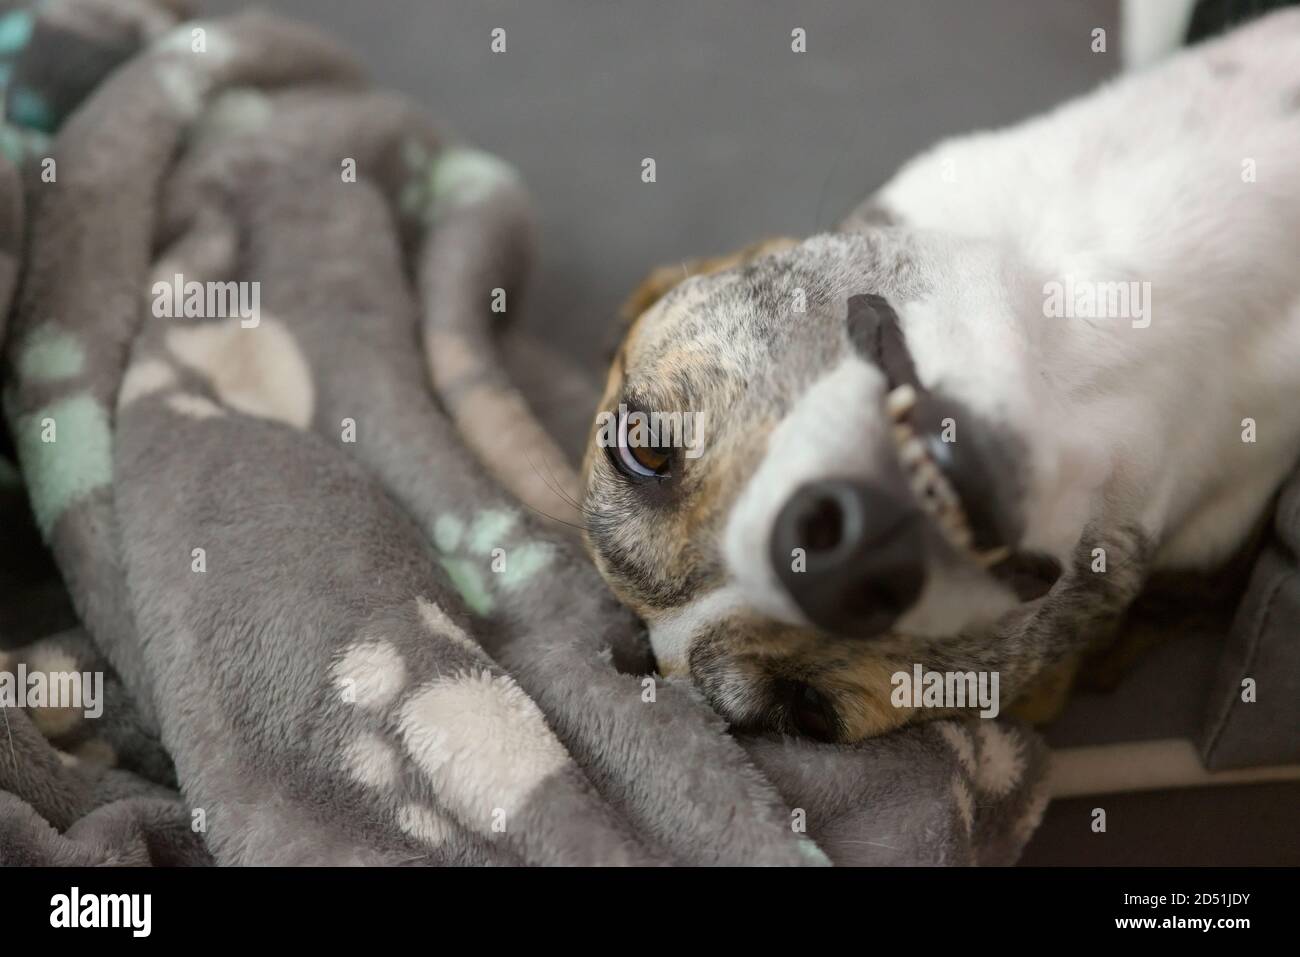 Pet greyhound's funny face as she lies in her dog bed. Focus on her eyes, but long neck and face visible too. Paw patterned dog blanket. Stock Photo